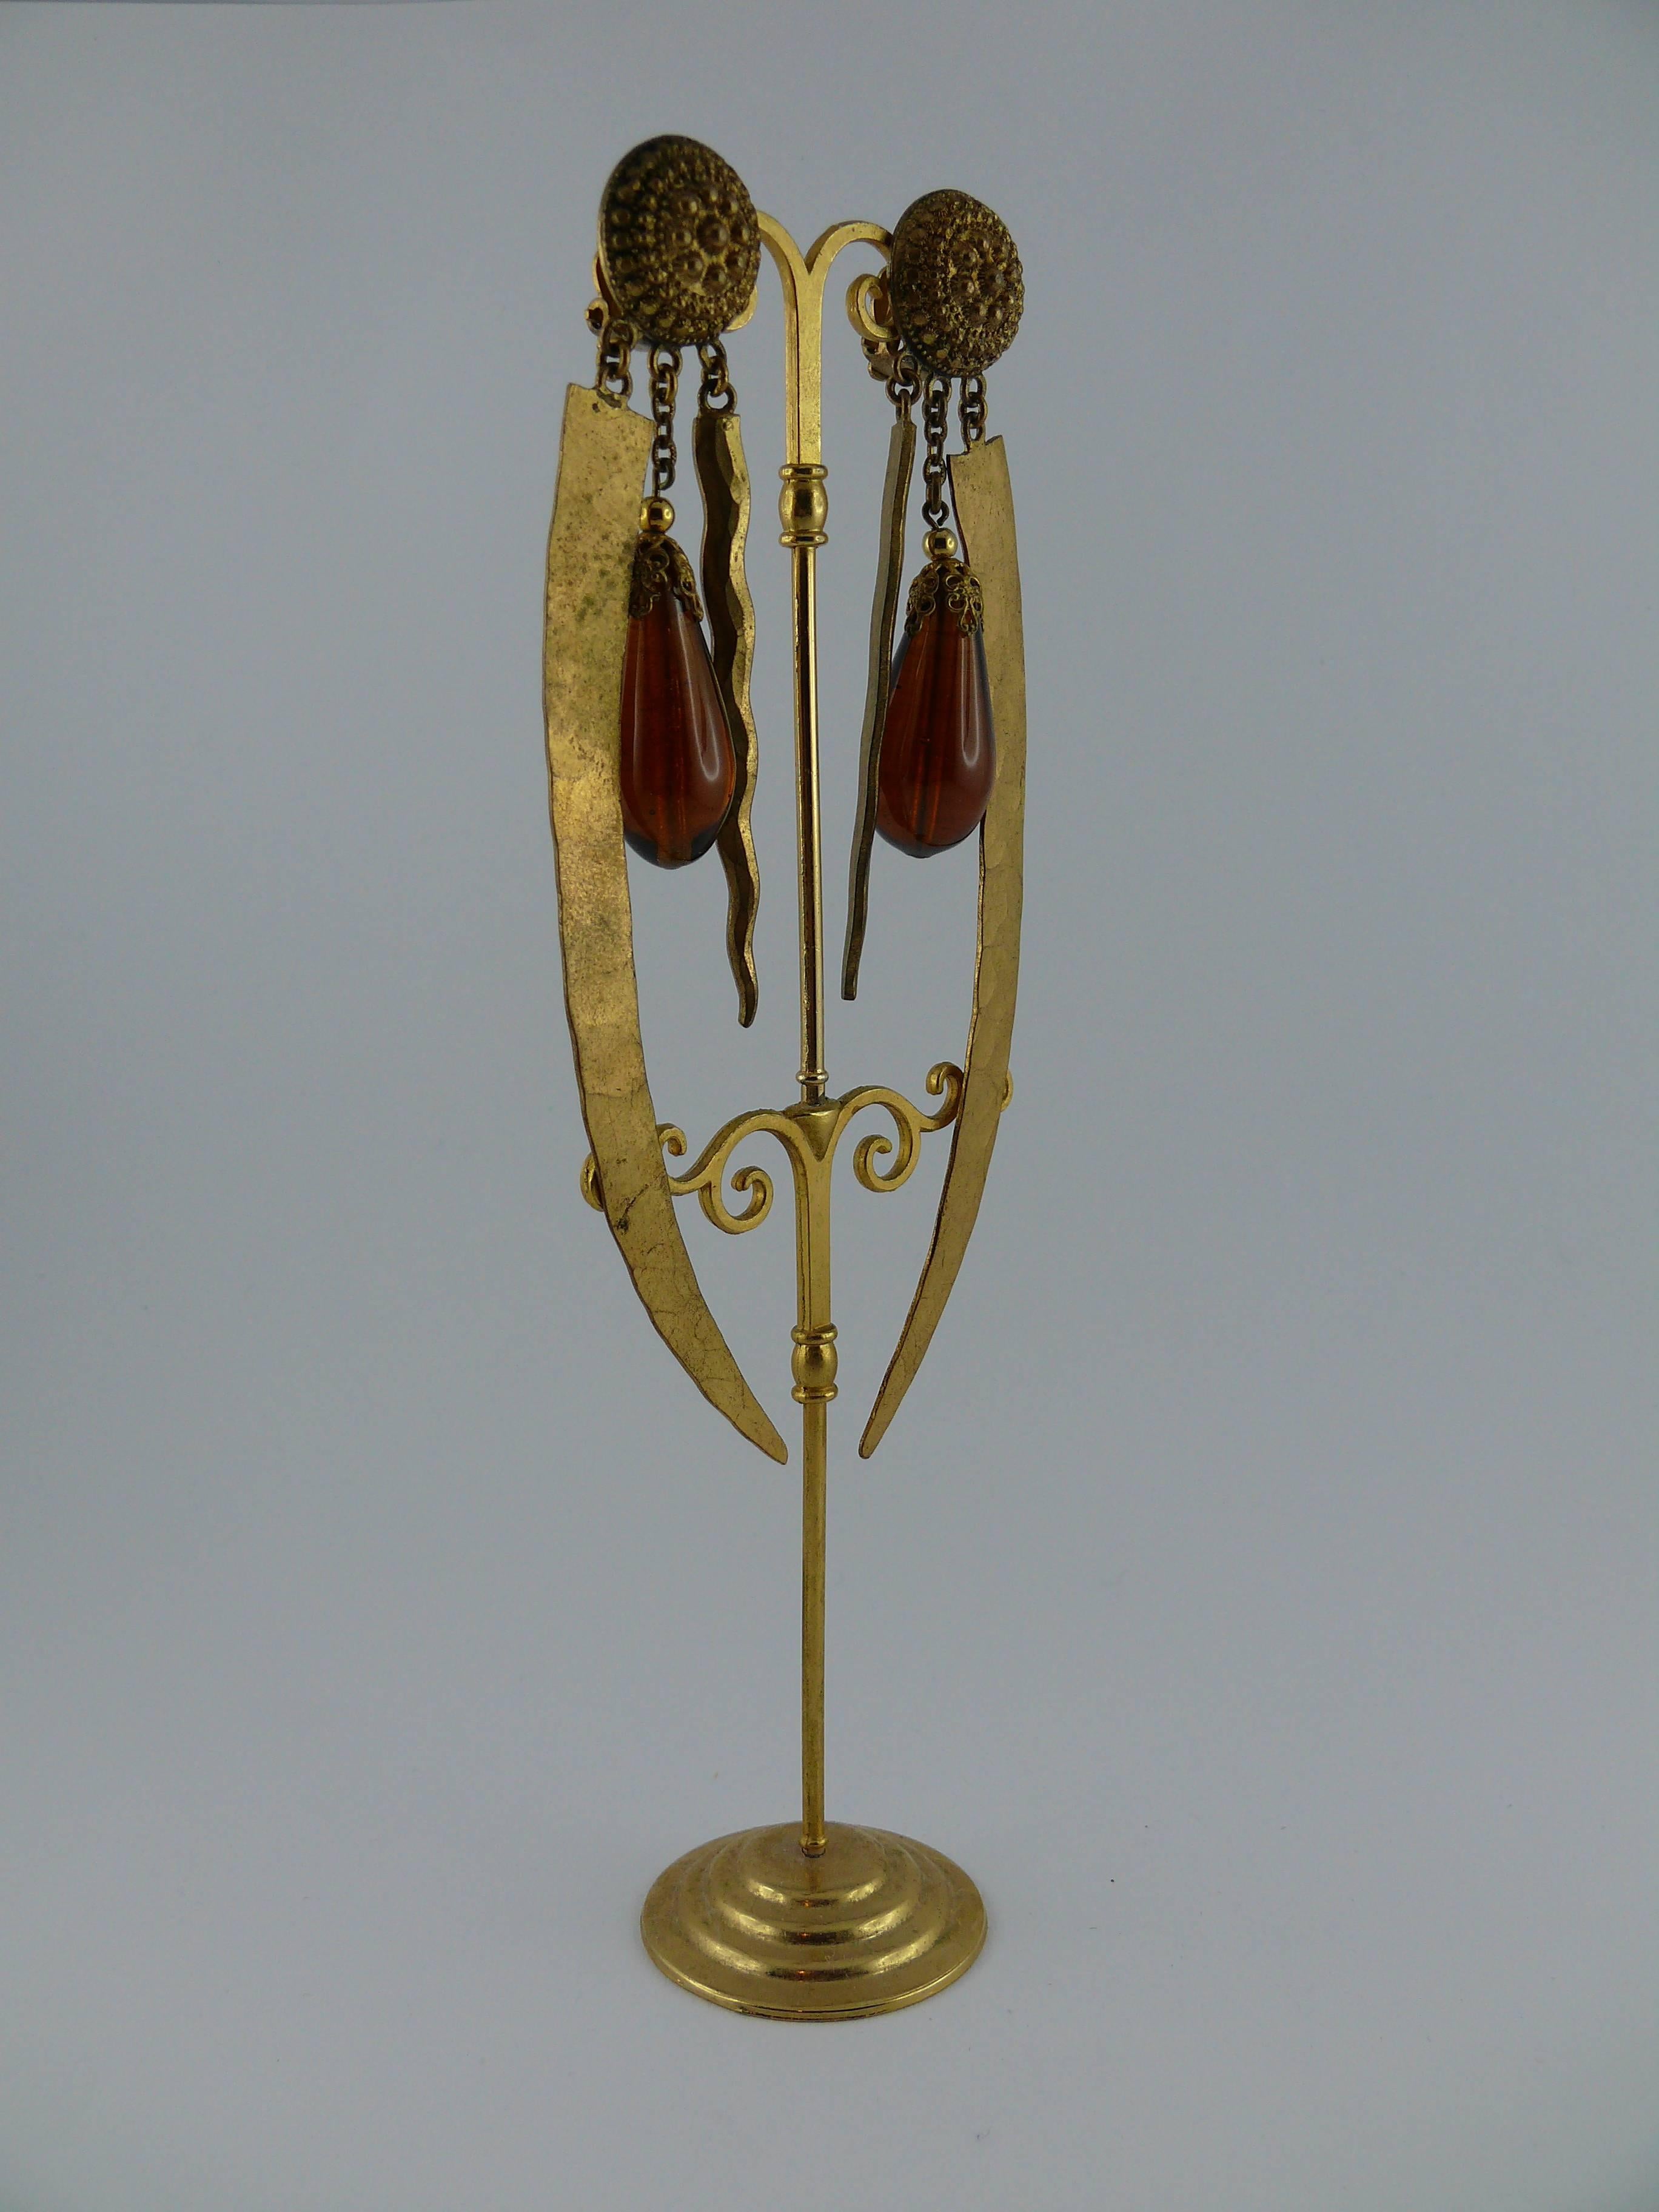 YVES SAINT LAURENT vintage rare early oriental style shoulder duster dangling earrings (clip-on).

These earrings consist of two daggers and a large amber glass drop.
Top part features a nicely detailed shield.

Embossed YSL.

Note
As a